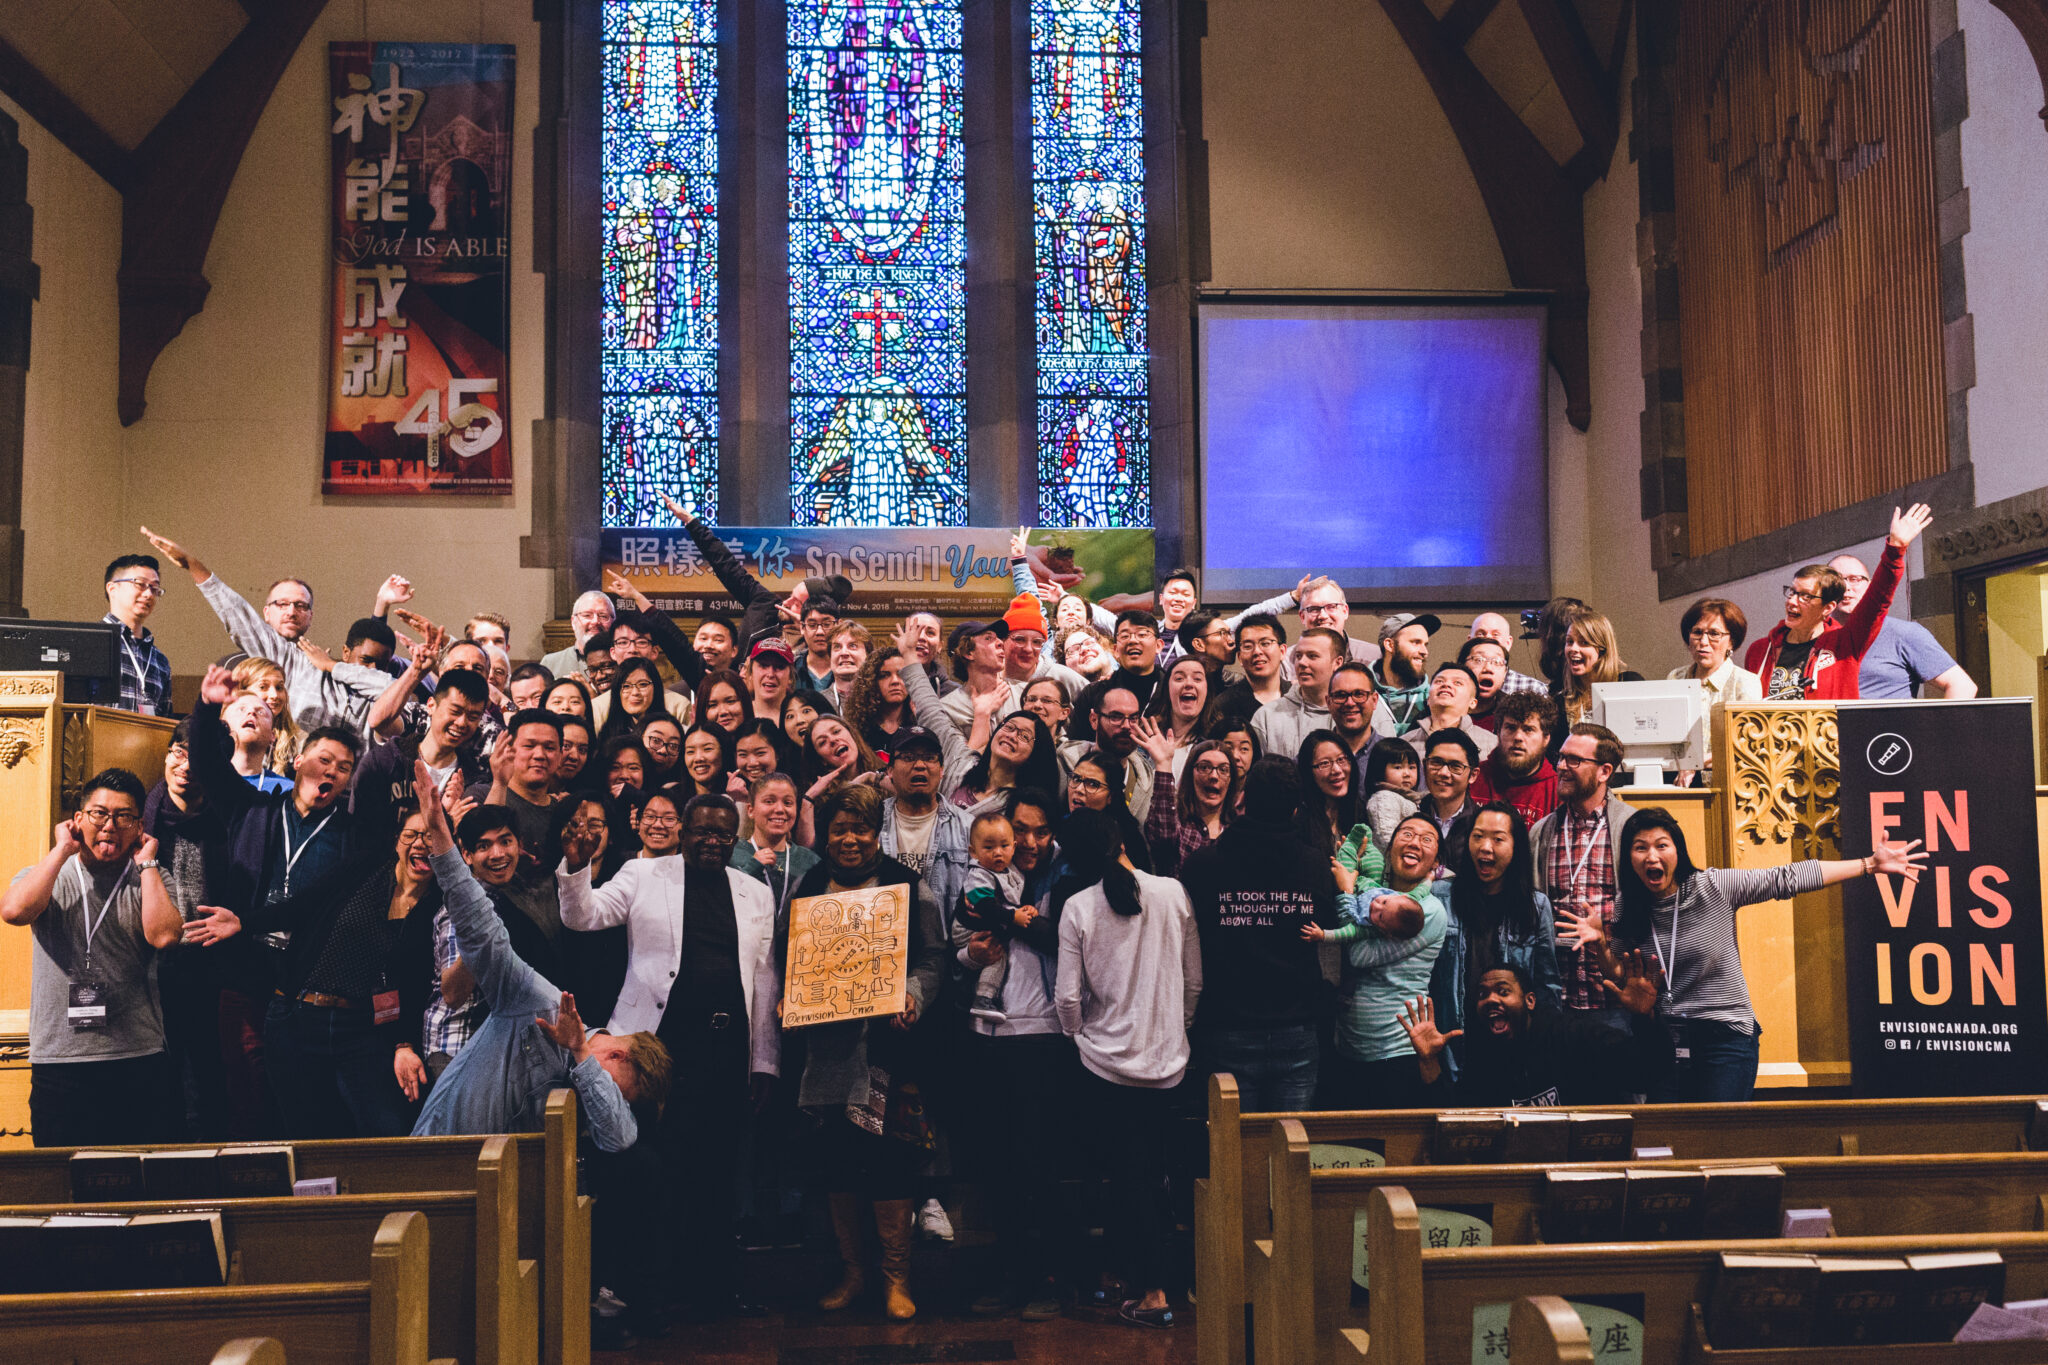 A group photo of the participants from Envision Summit 2019 are standing at the front of a church smiling at the camera.